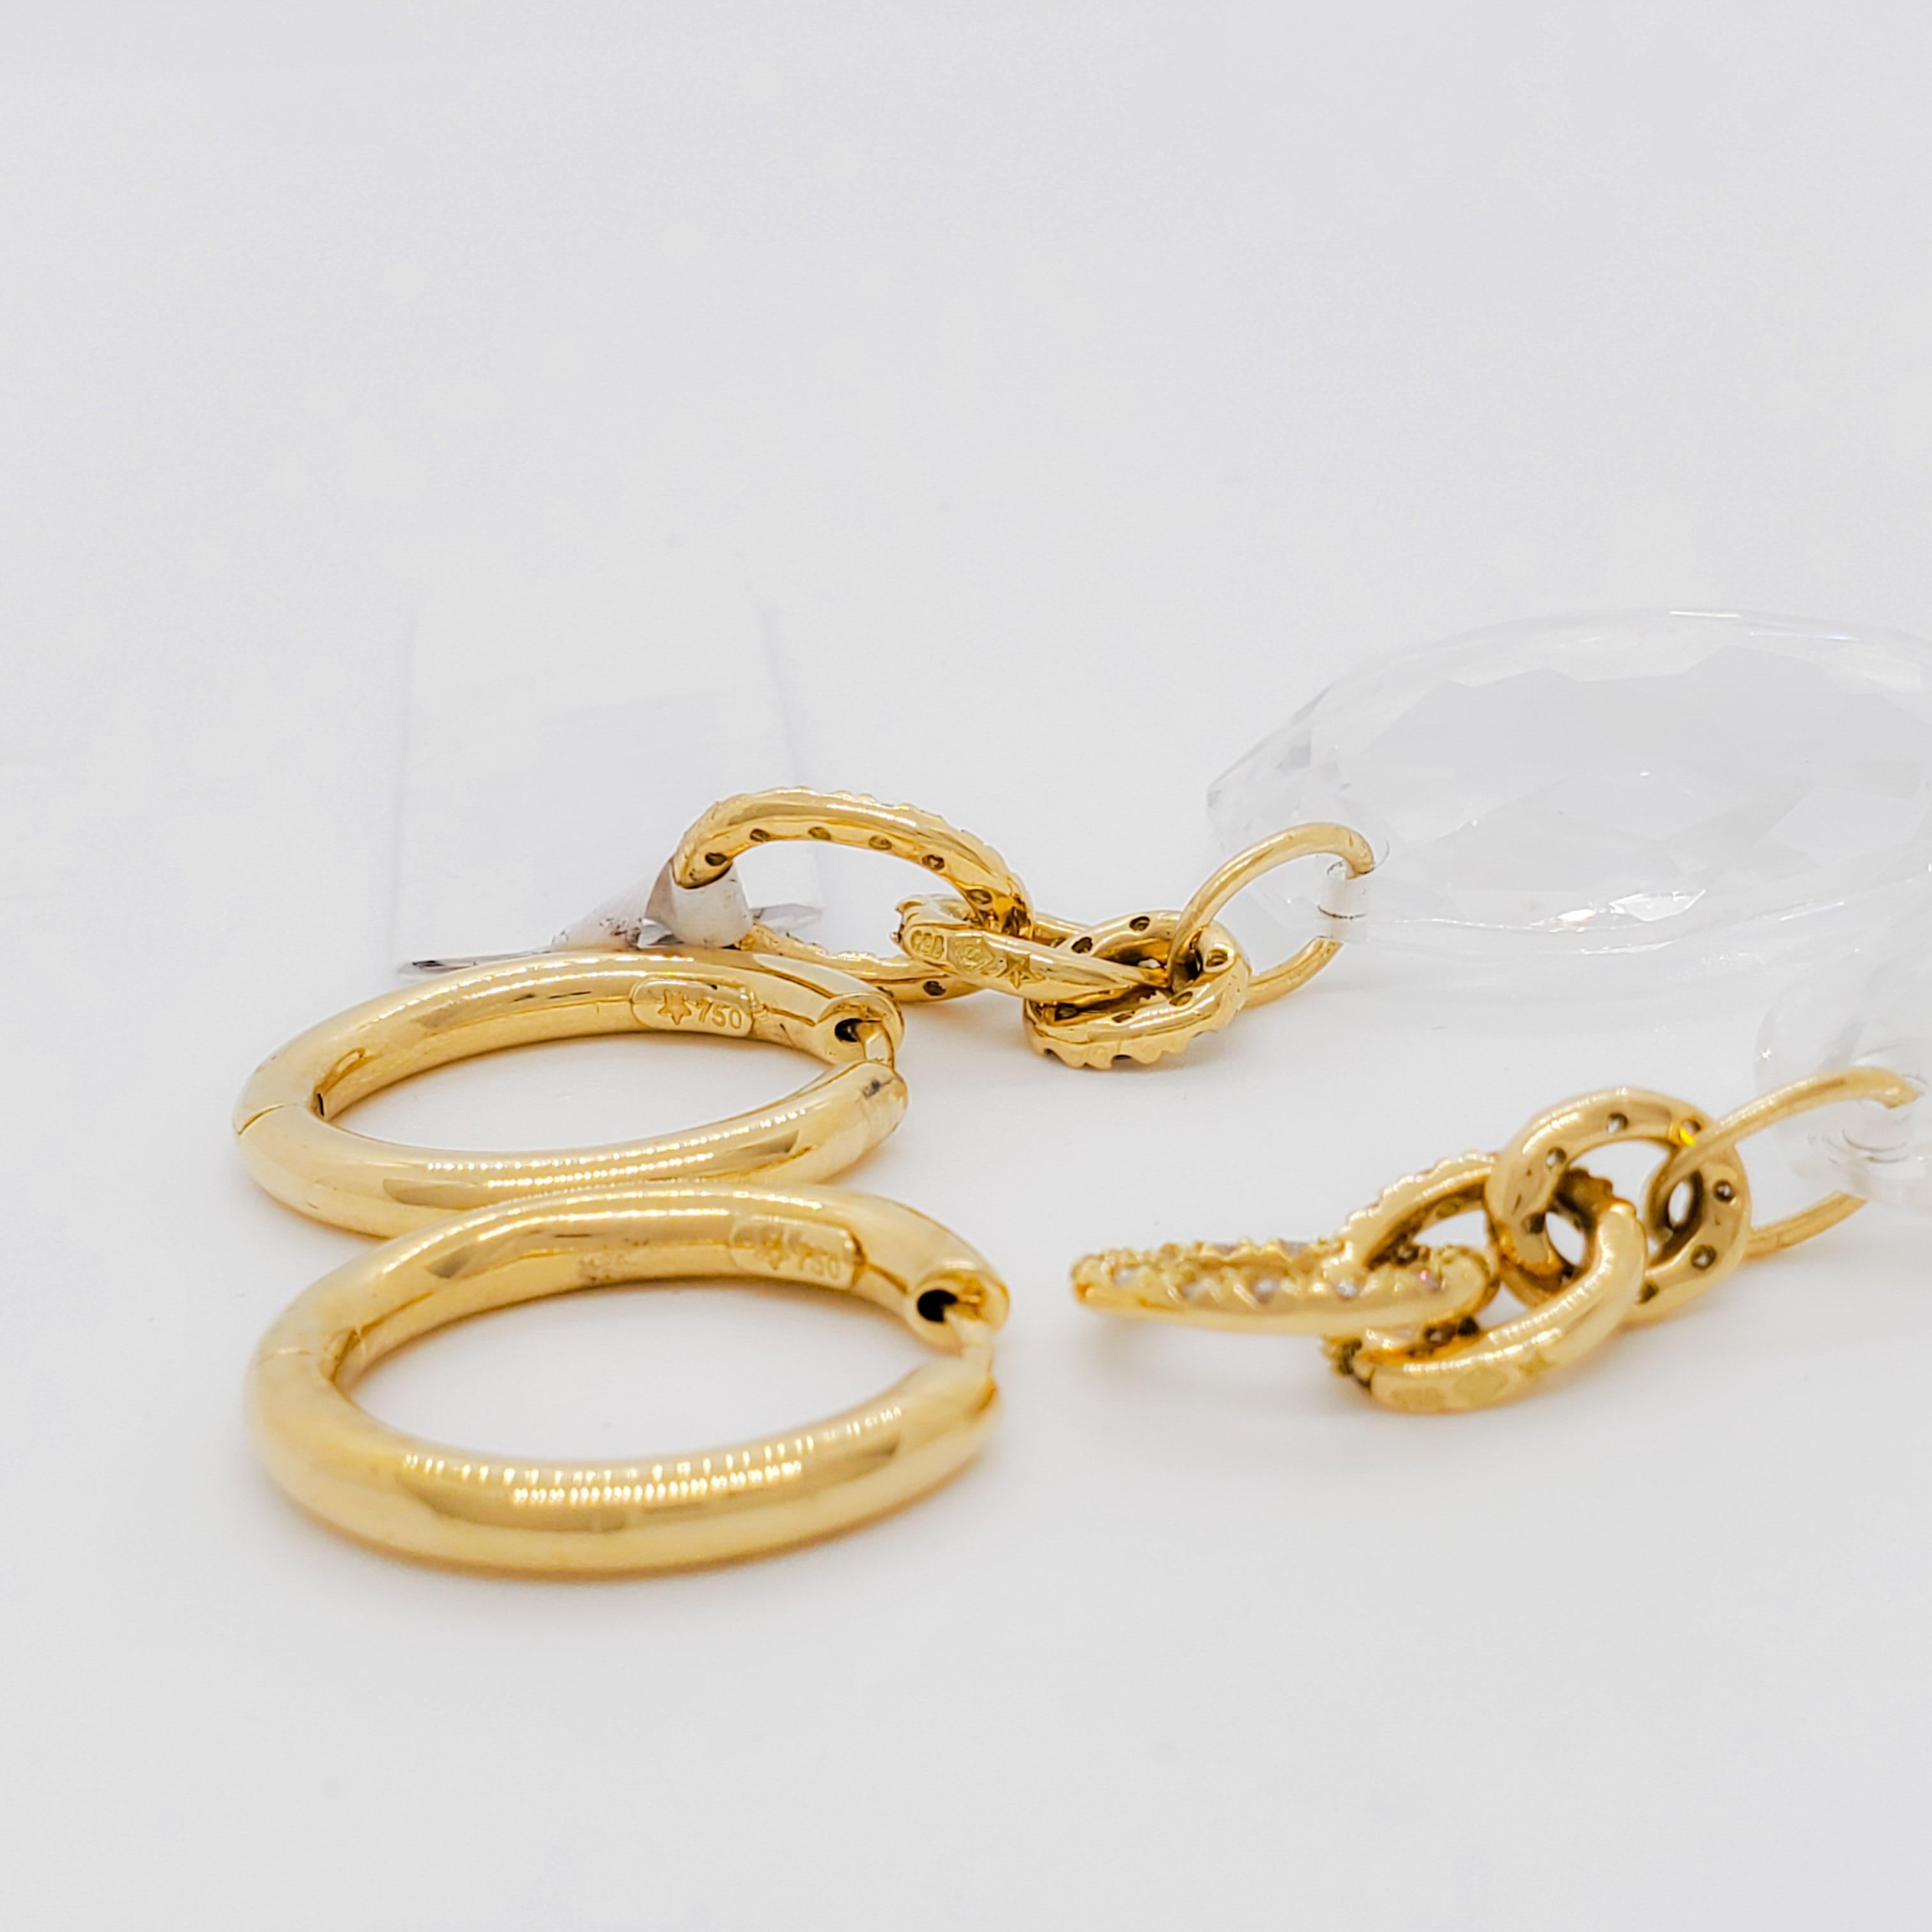 H. Stern and DVF Collaboration Dangle Earrings with Diamonds in 18k Yellow Gold 2